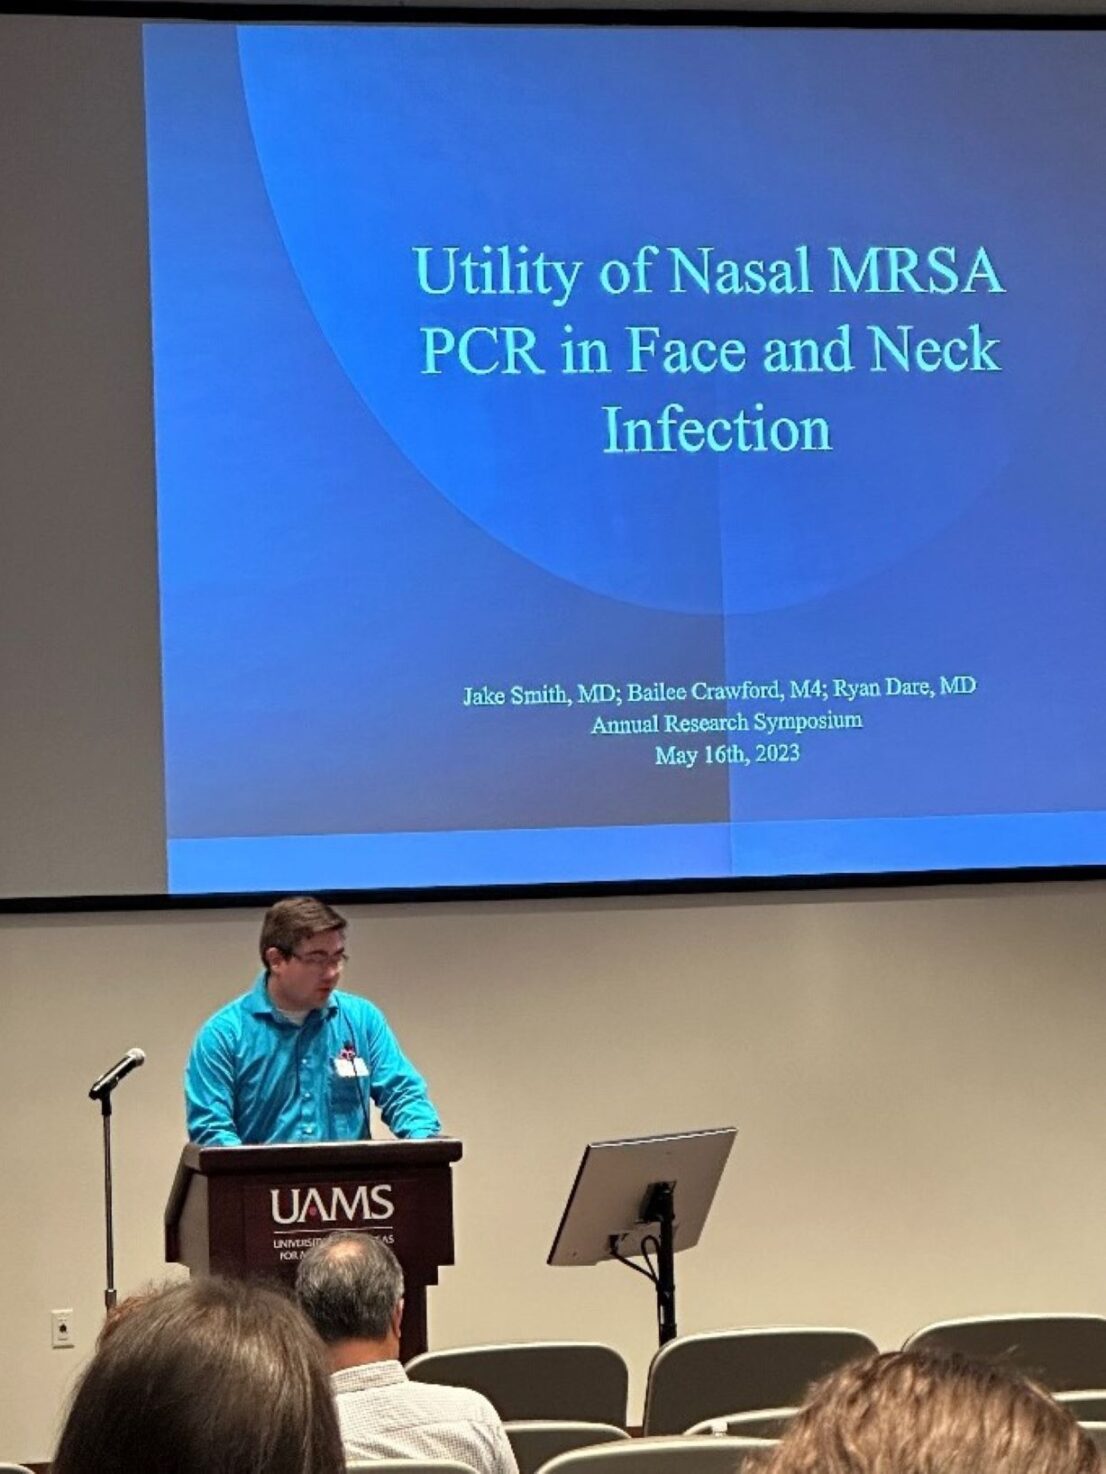 Jake Smith presenting the research oral presentation on Utility of Nasal MRSA PCR in face and neck infection.